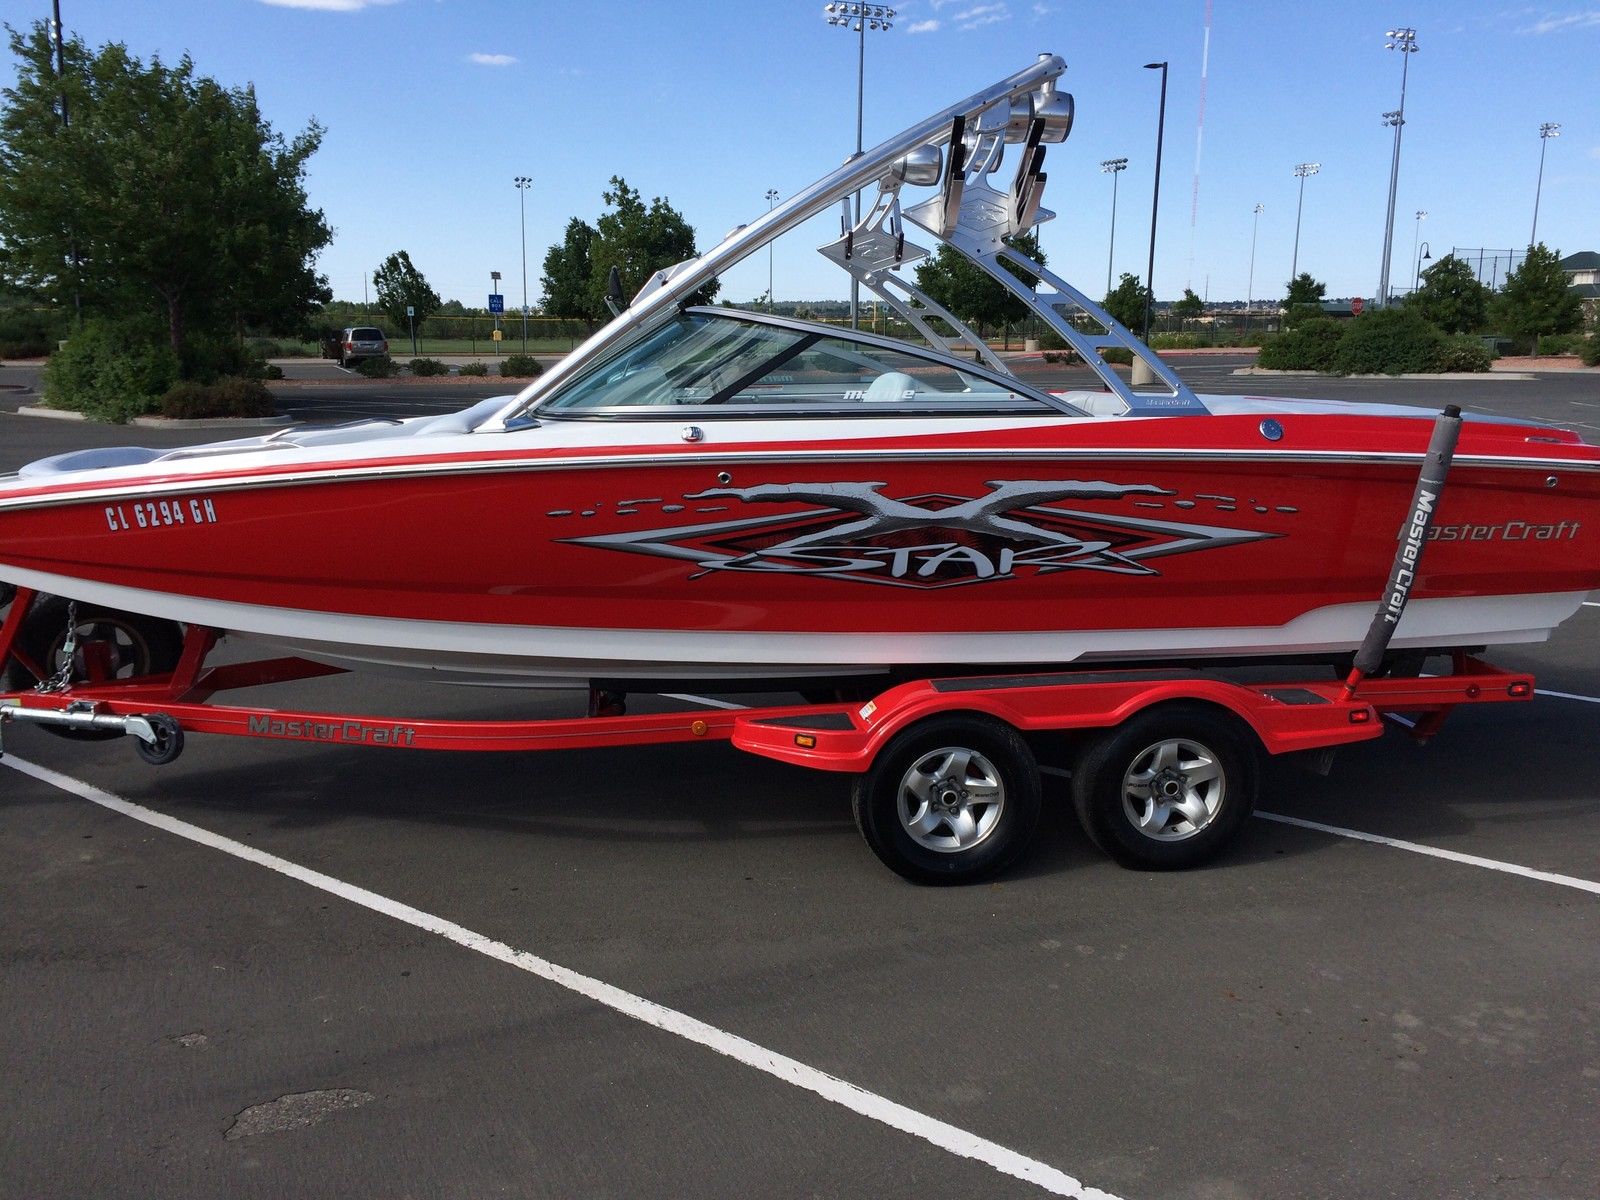 Mastercraft X Star 2004 for sale for $36,000 - Boats-from ...